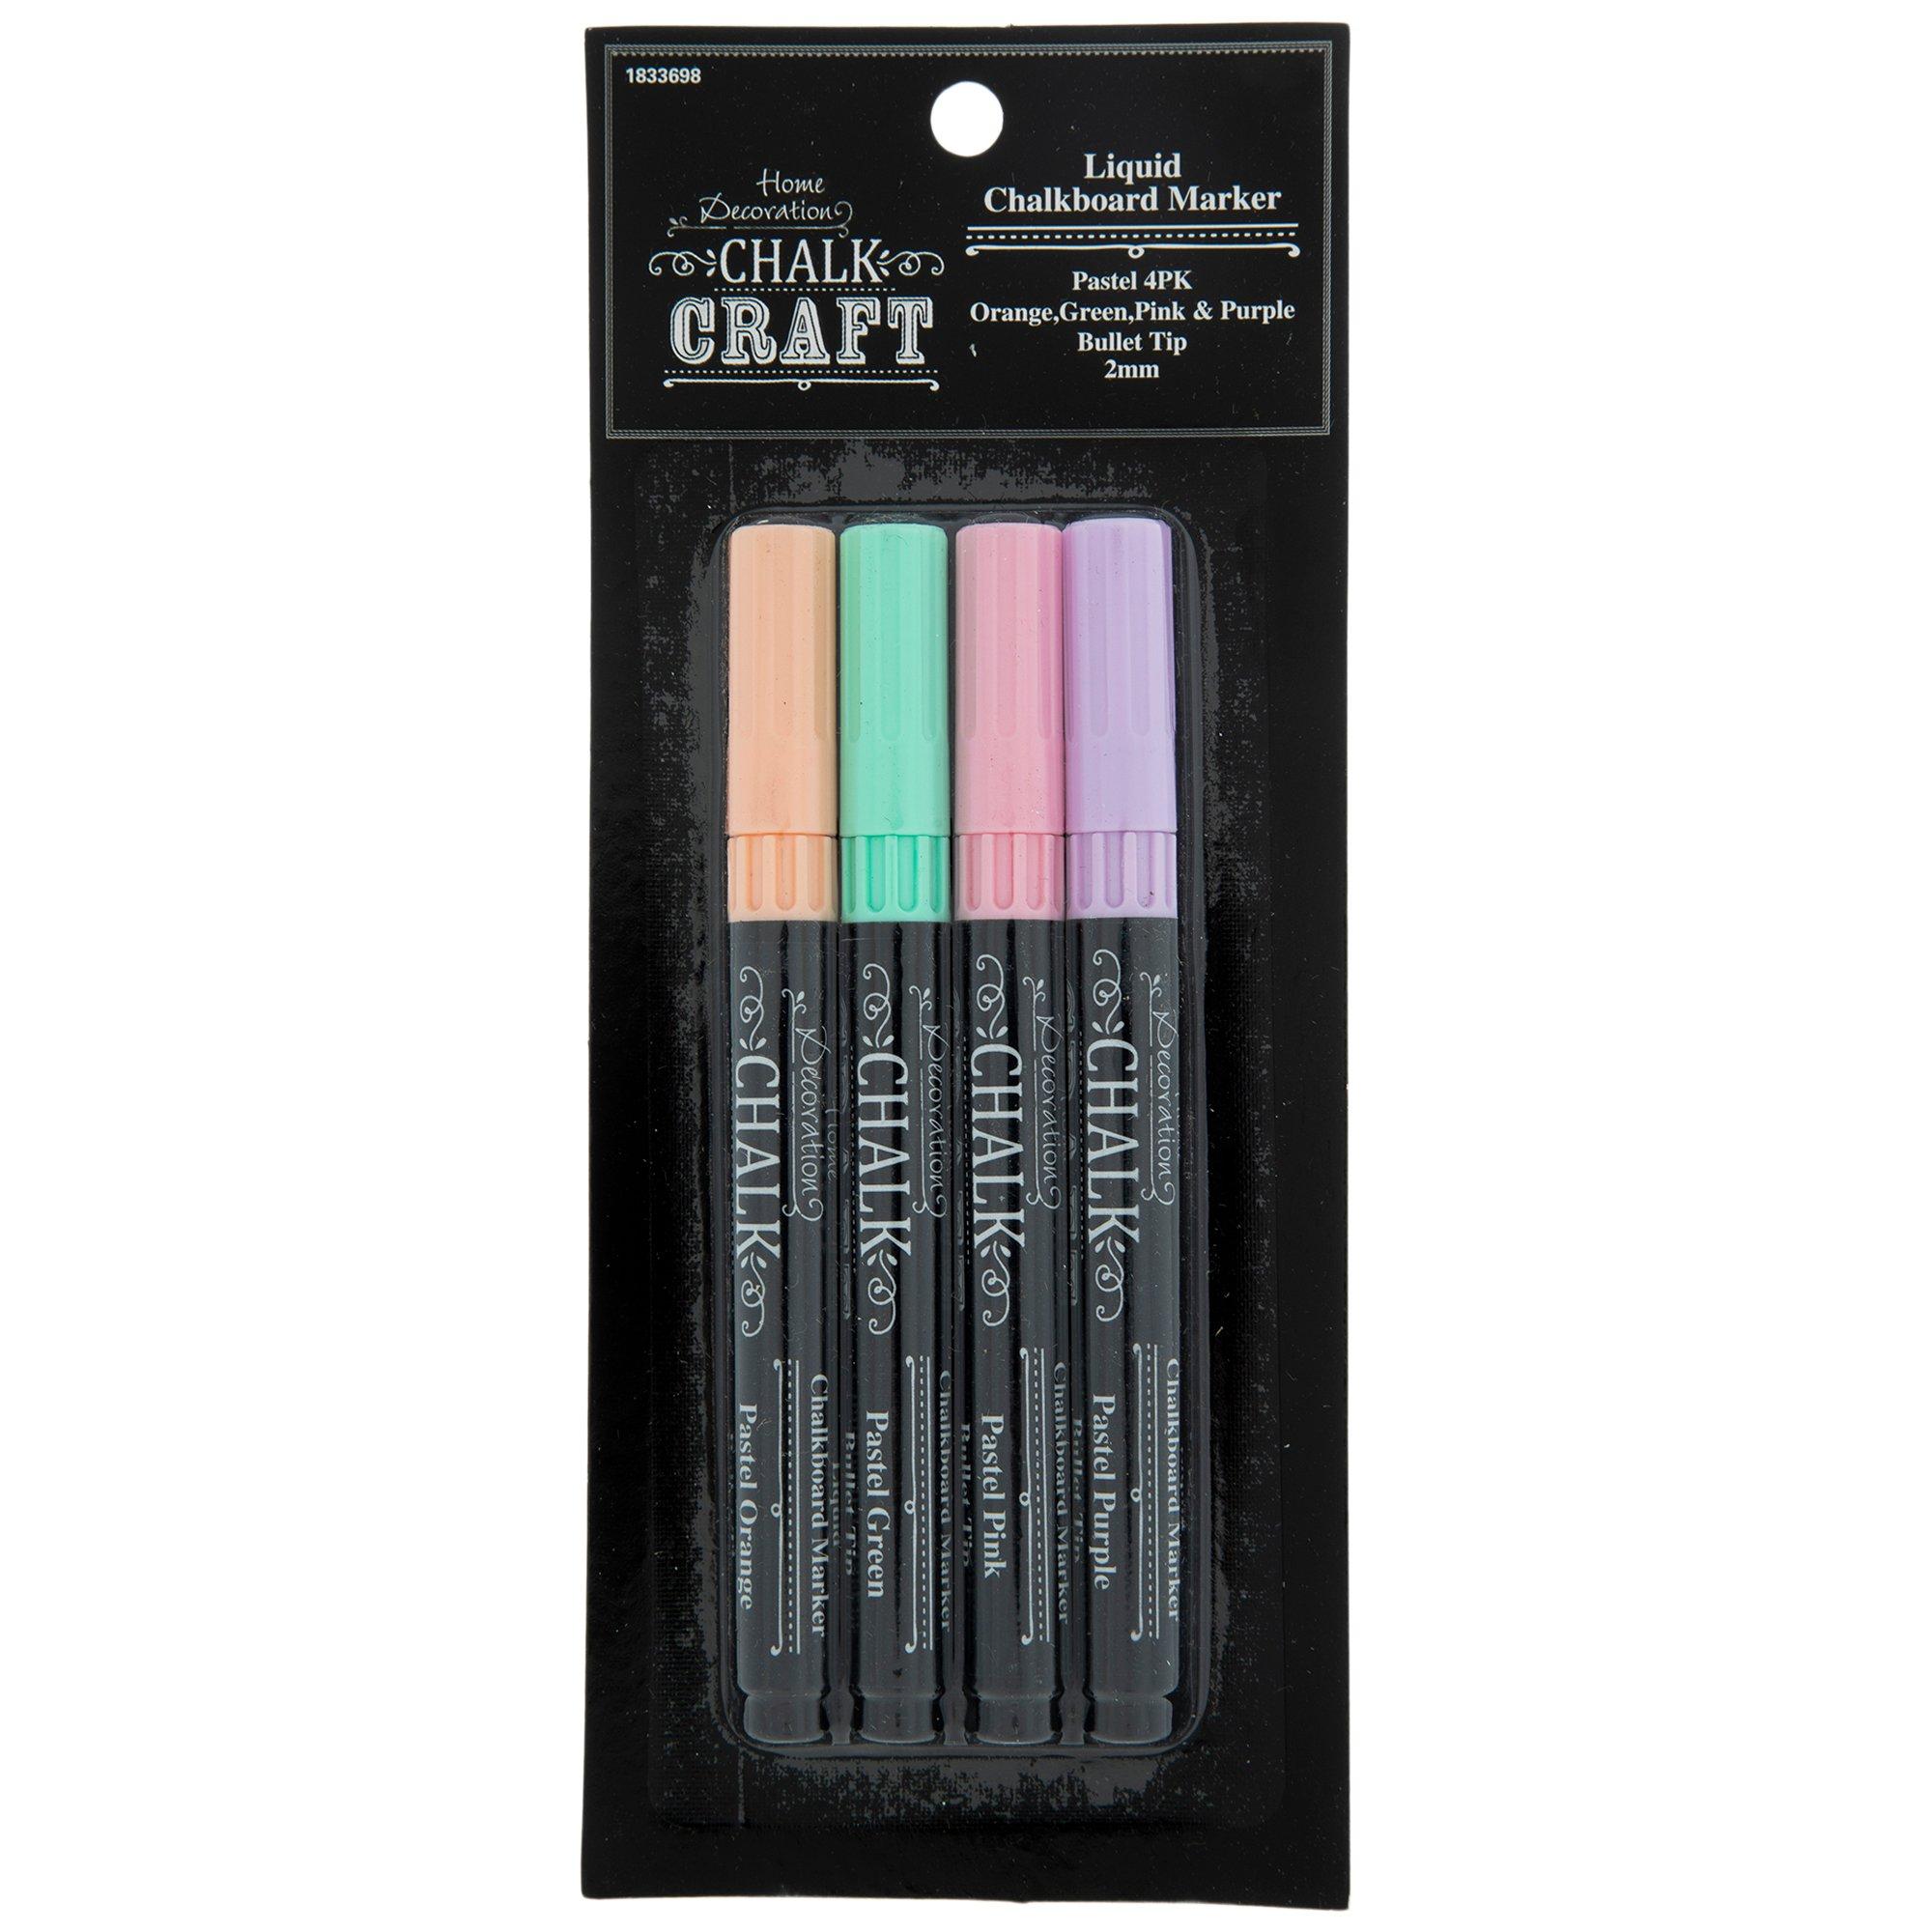 Cestari Purple Liquid Chalk Pen - 2mm Skinny Tip for Writing and Drawing on  Glass, Mirrors, Stainless Steel, Ceramic, Vinyl Chalkboards, and Crafts 